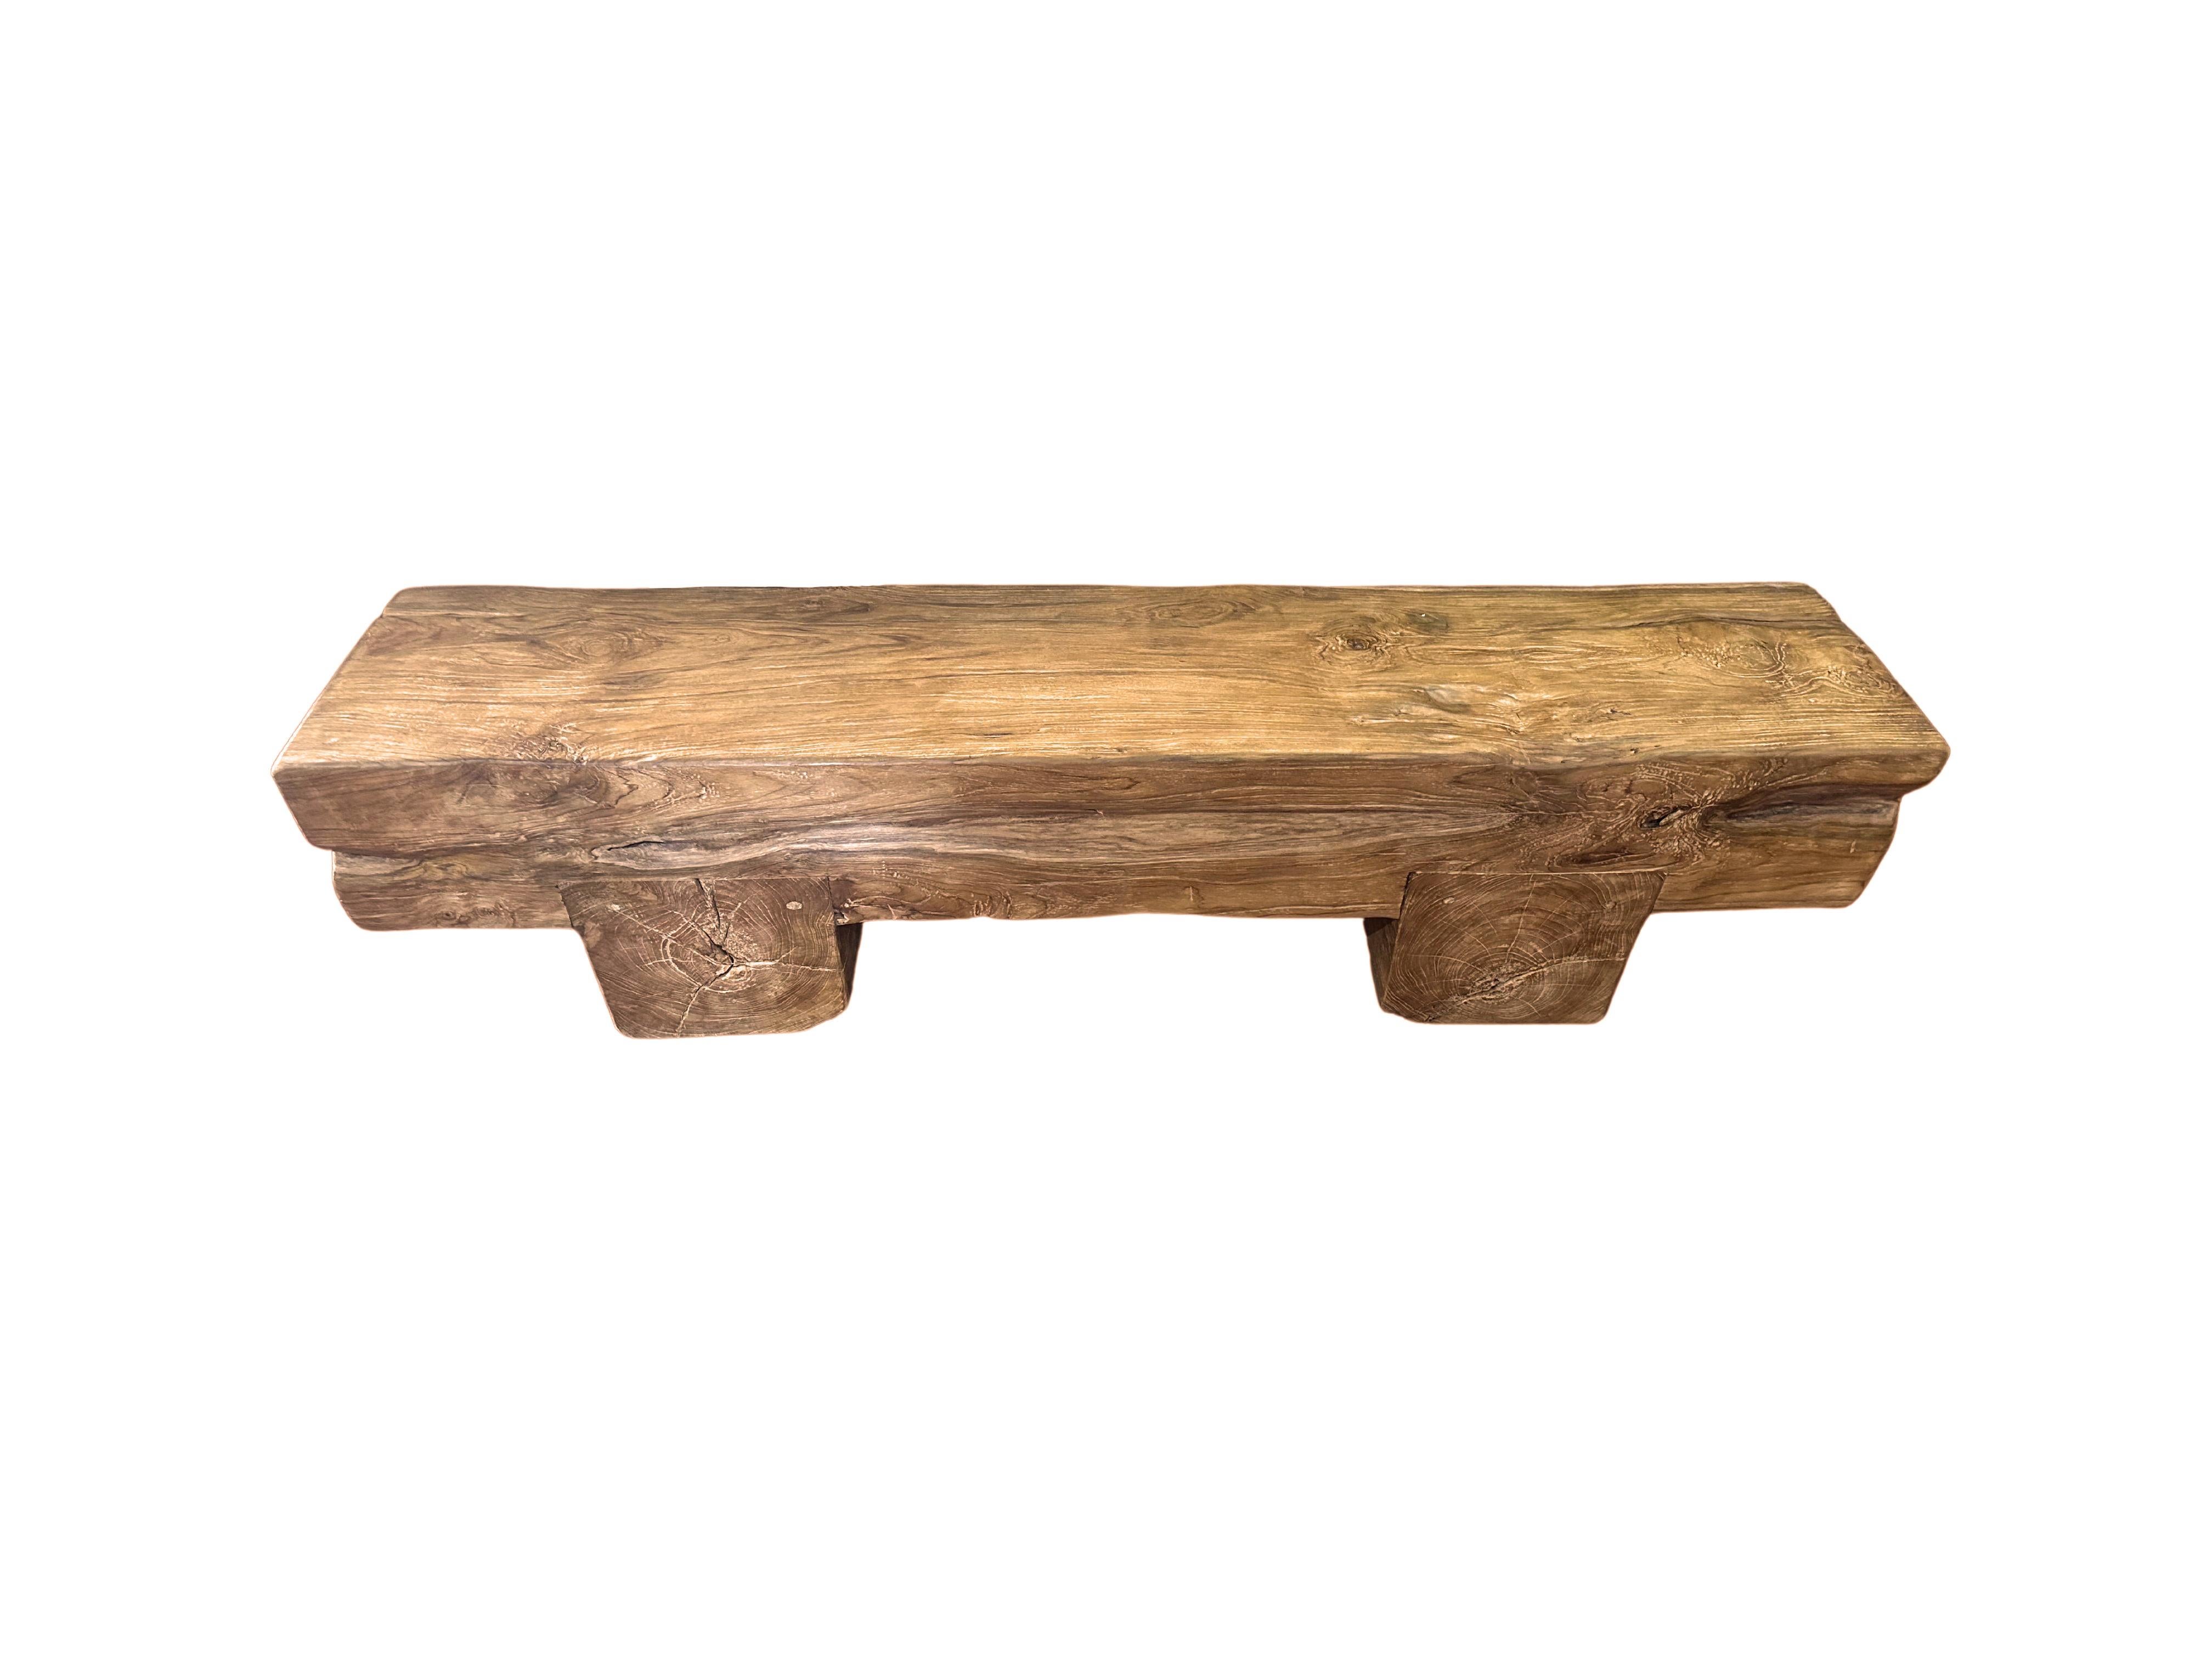 This solid teak wood bench features a wonderful organic form with a mix of wood textures and shades. Elevated by two solid teak wood legs, the seat and legs were carved from single blocks of wood. A wonderful addition to bring warmth to any